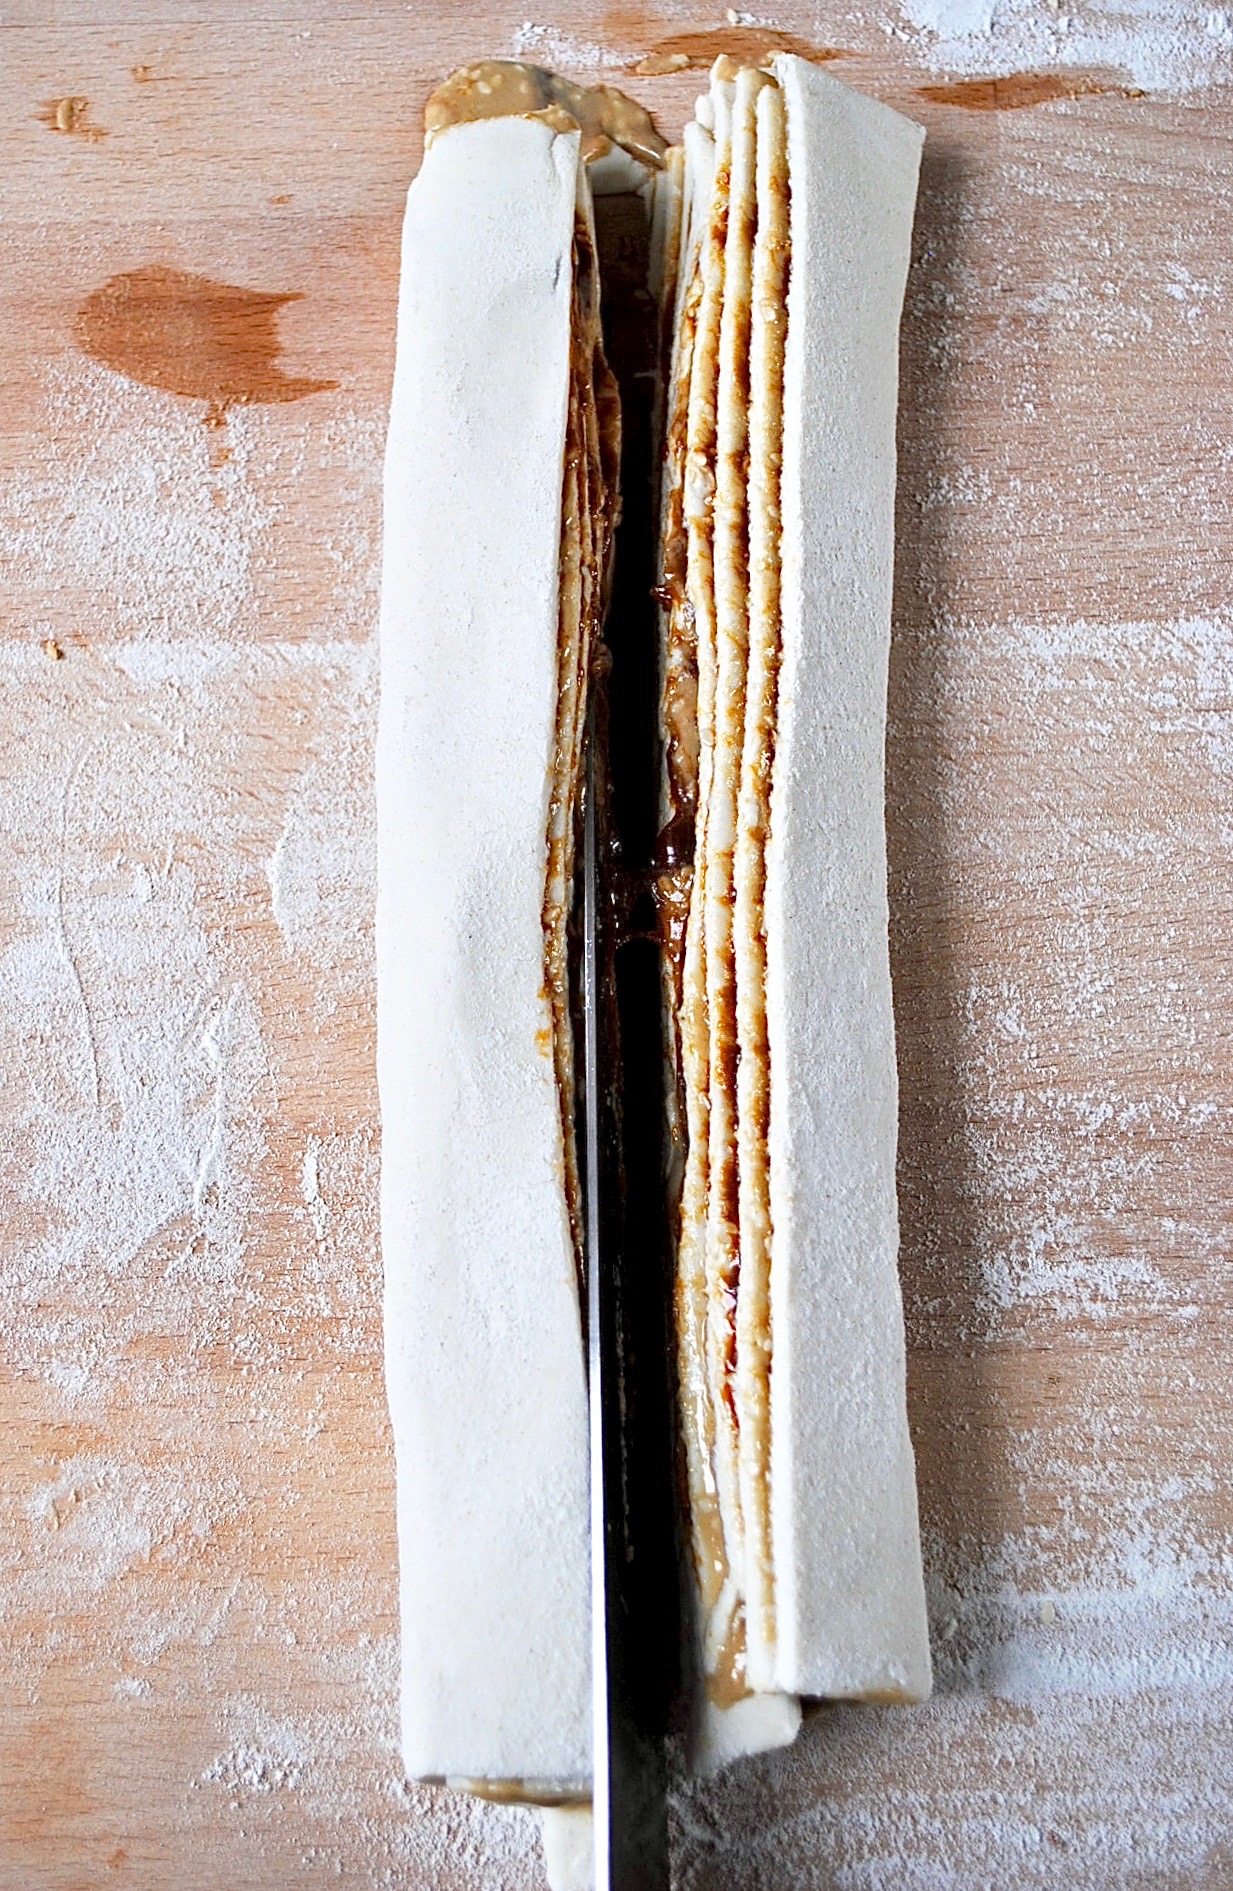 Vegan Puff Pastry Twists with Marmite and Tahini